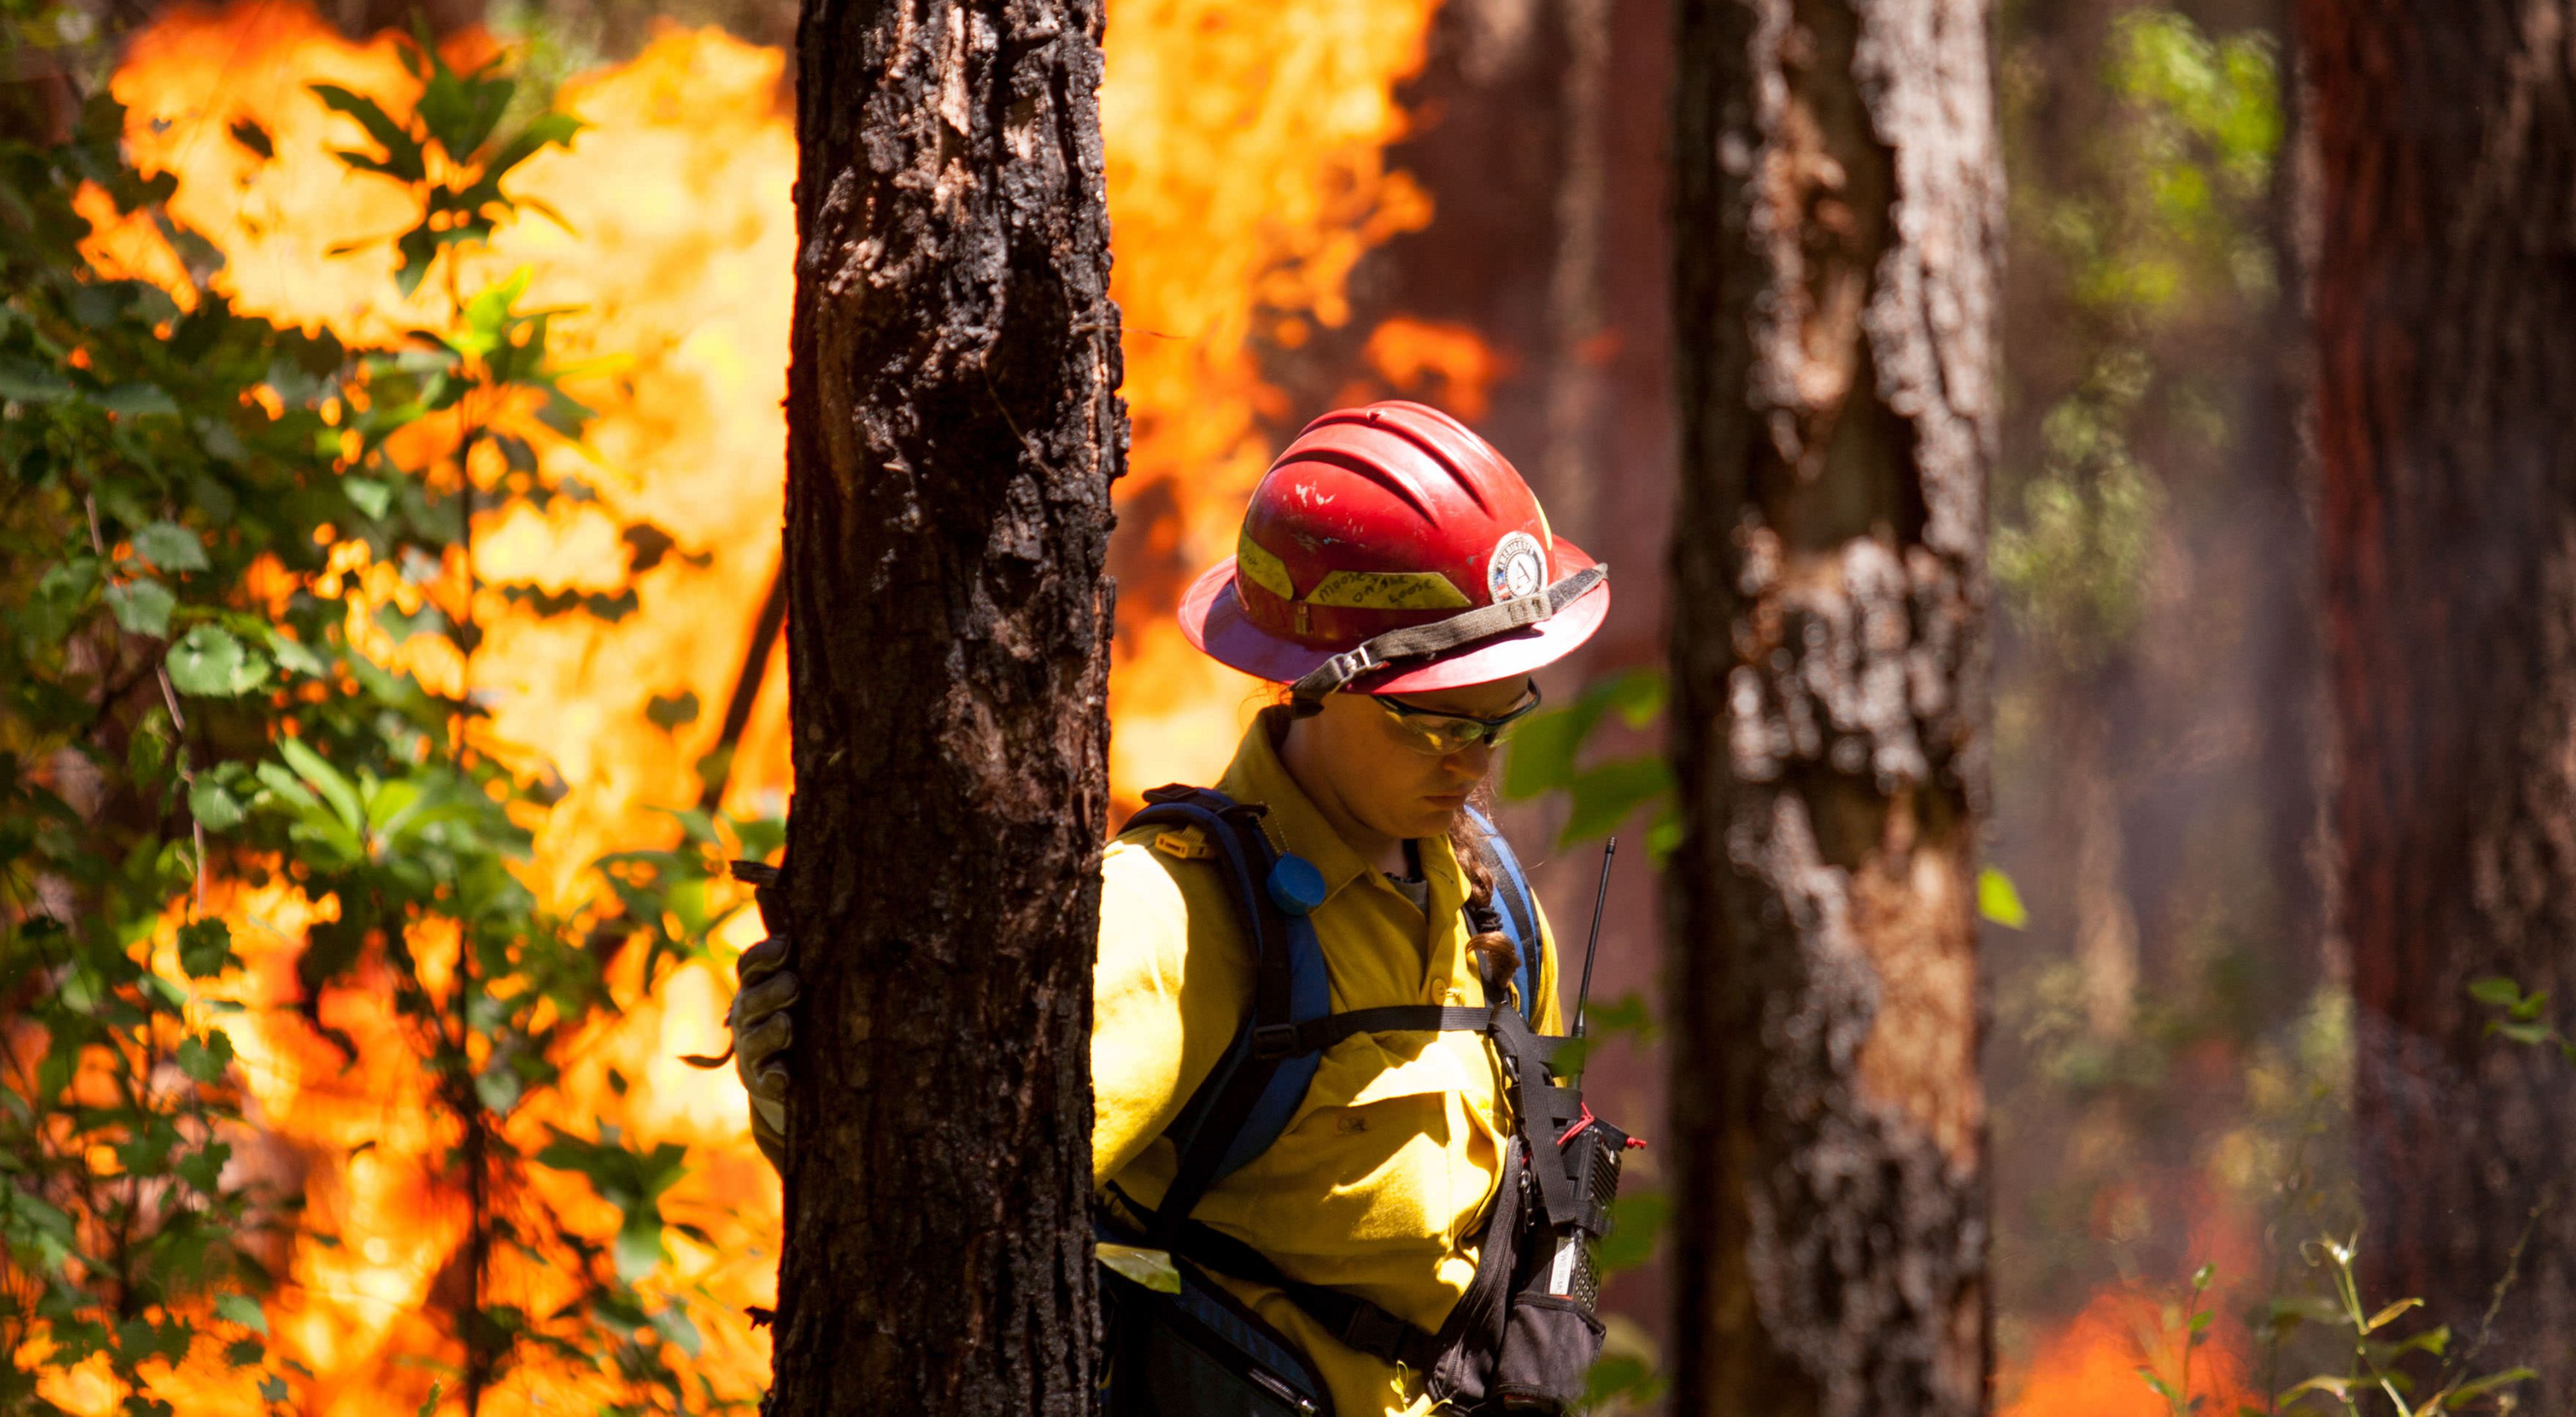 A burn crew member in fire-protective gear walks among pine trees with flames in the background.